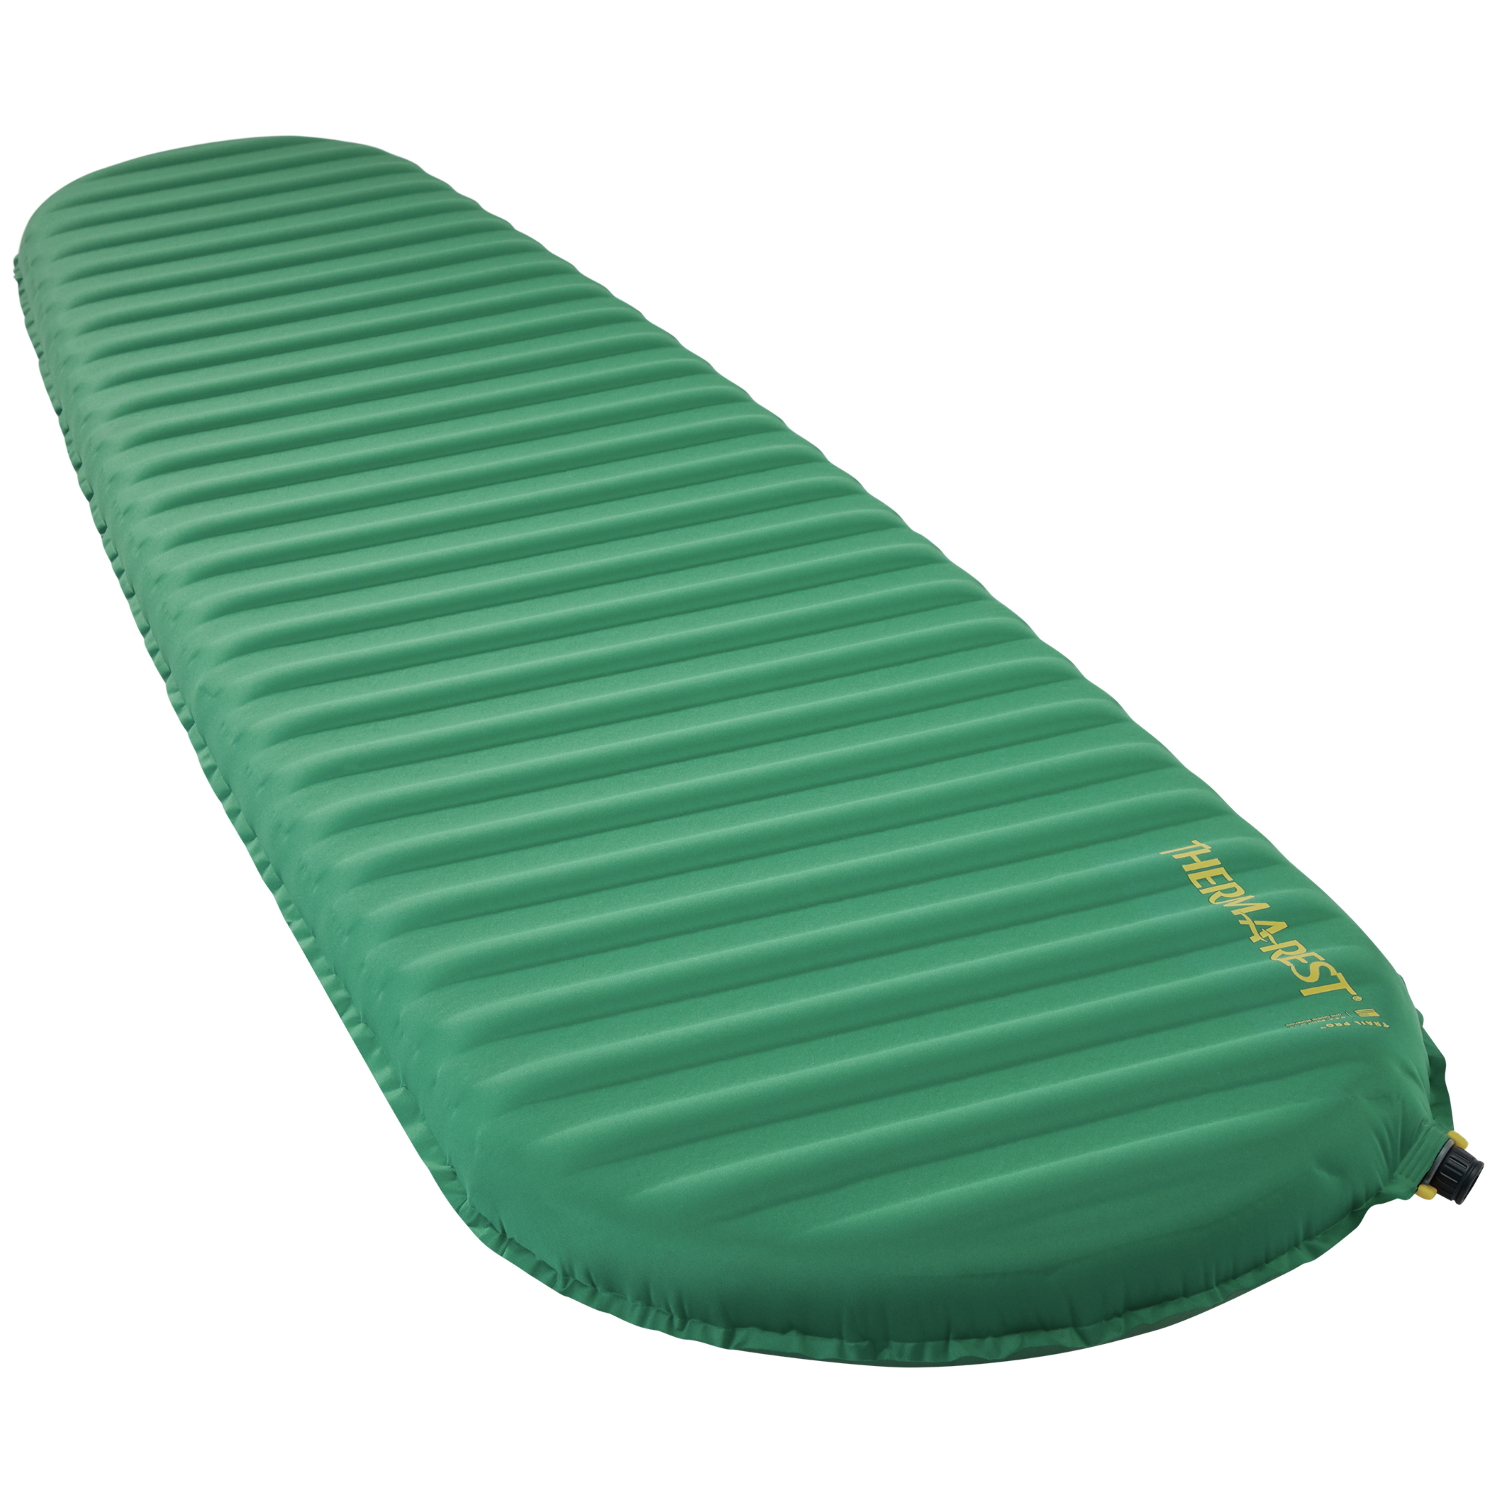 Image of Therm-a-Rest Trail Pro Sleeping Pad - Regular - pine